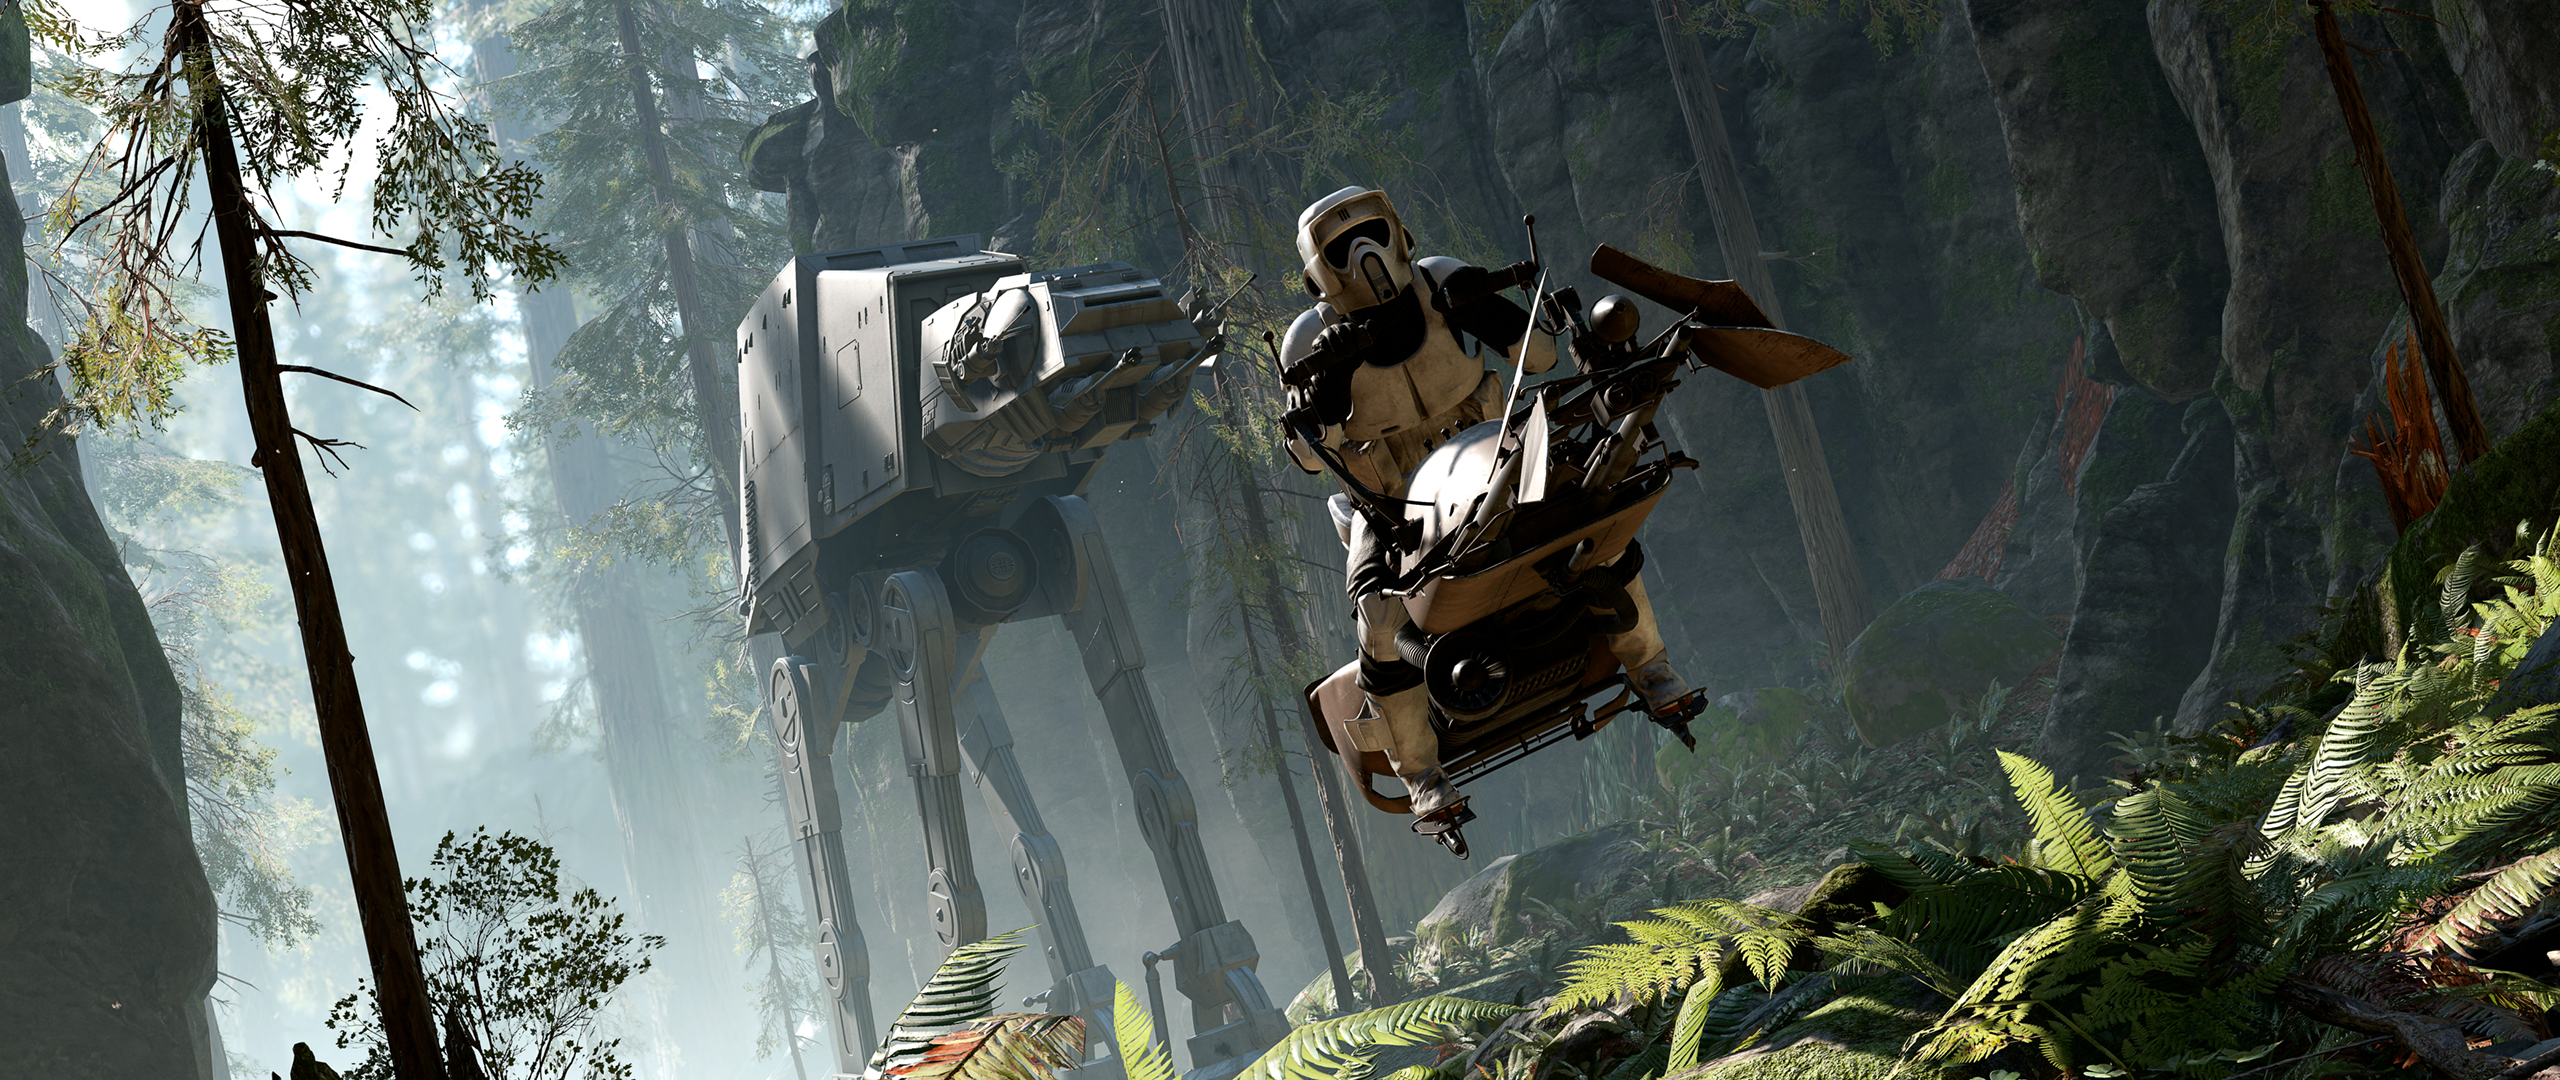 General 2560x1080 Star Wars Star Wars: Battlefront video games speeder bike Battle of Endor ultrawide scout trooper PC gaming video game art AT-AT Imperial Forces science fiction vehicle